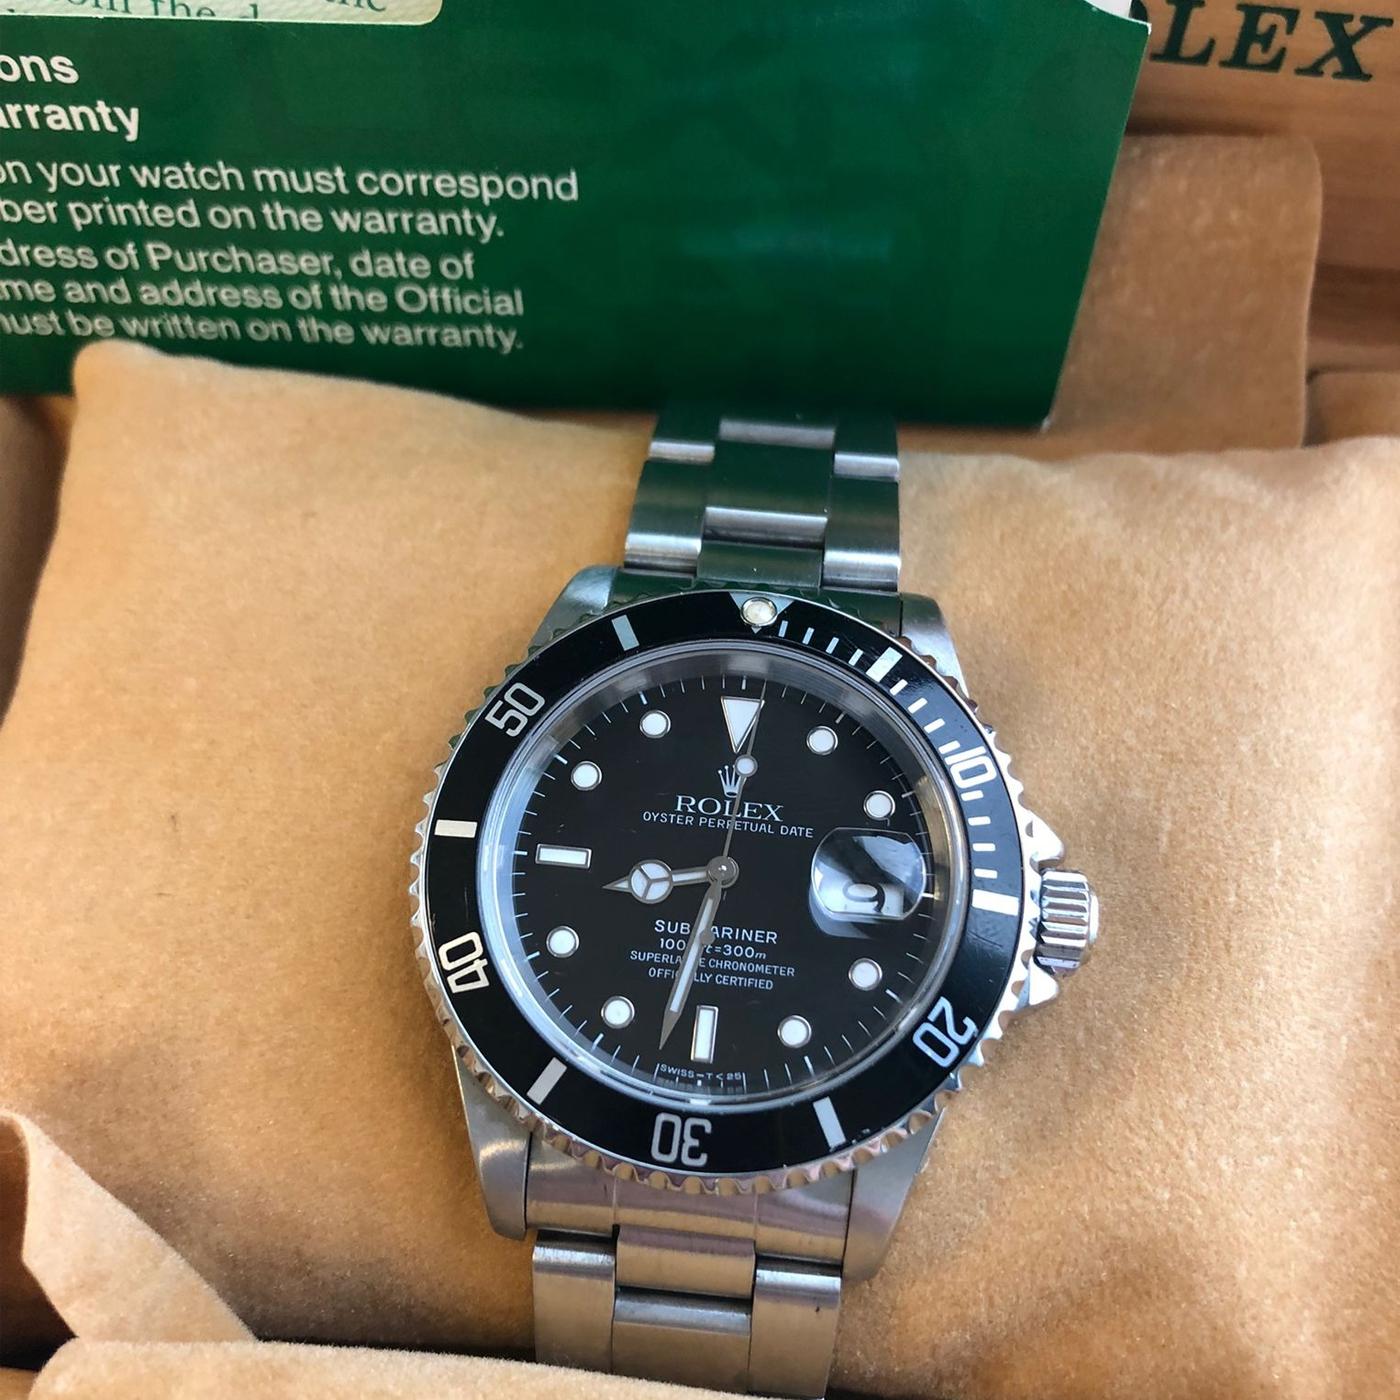 Rolex Submariner Date 40mm Black Dial Stainless Steel Oyster Watch 16610 For Sale 1